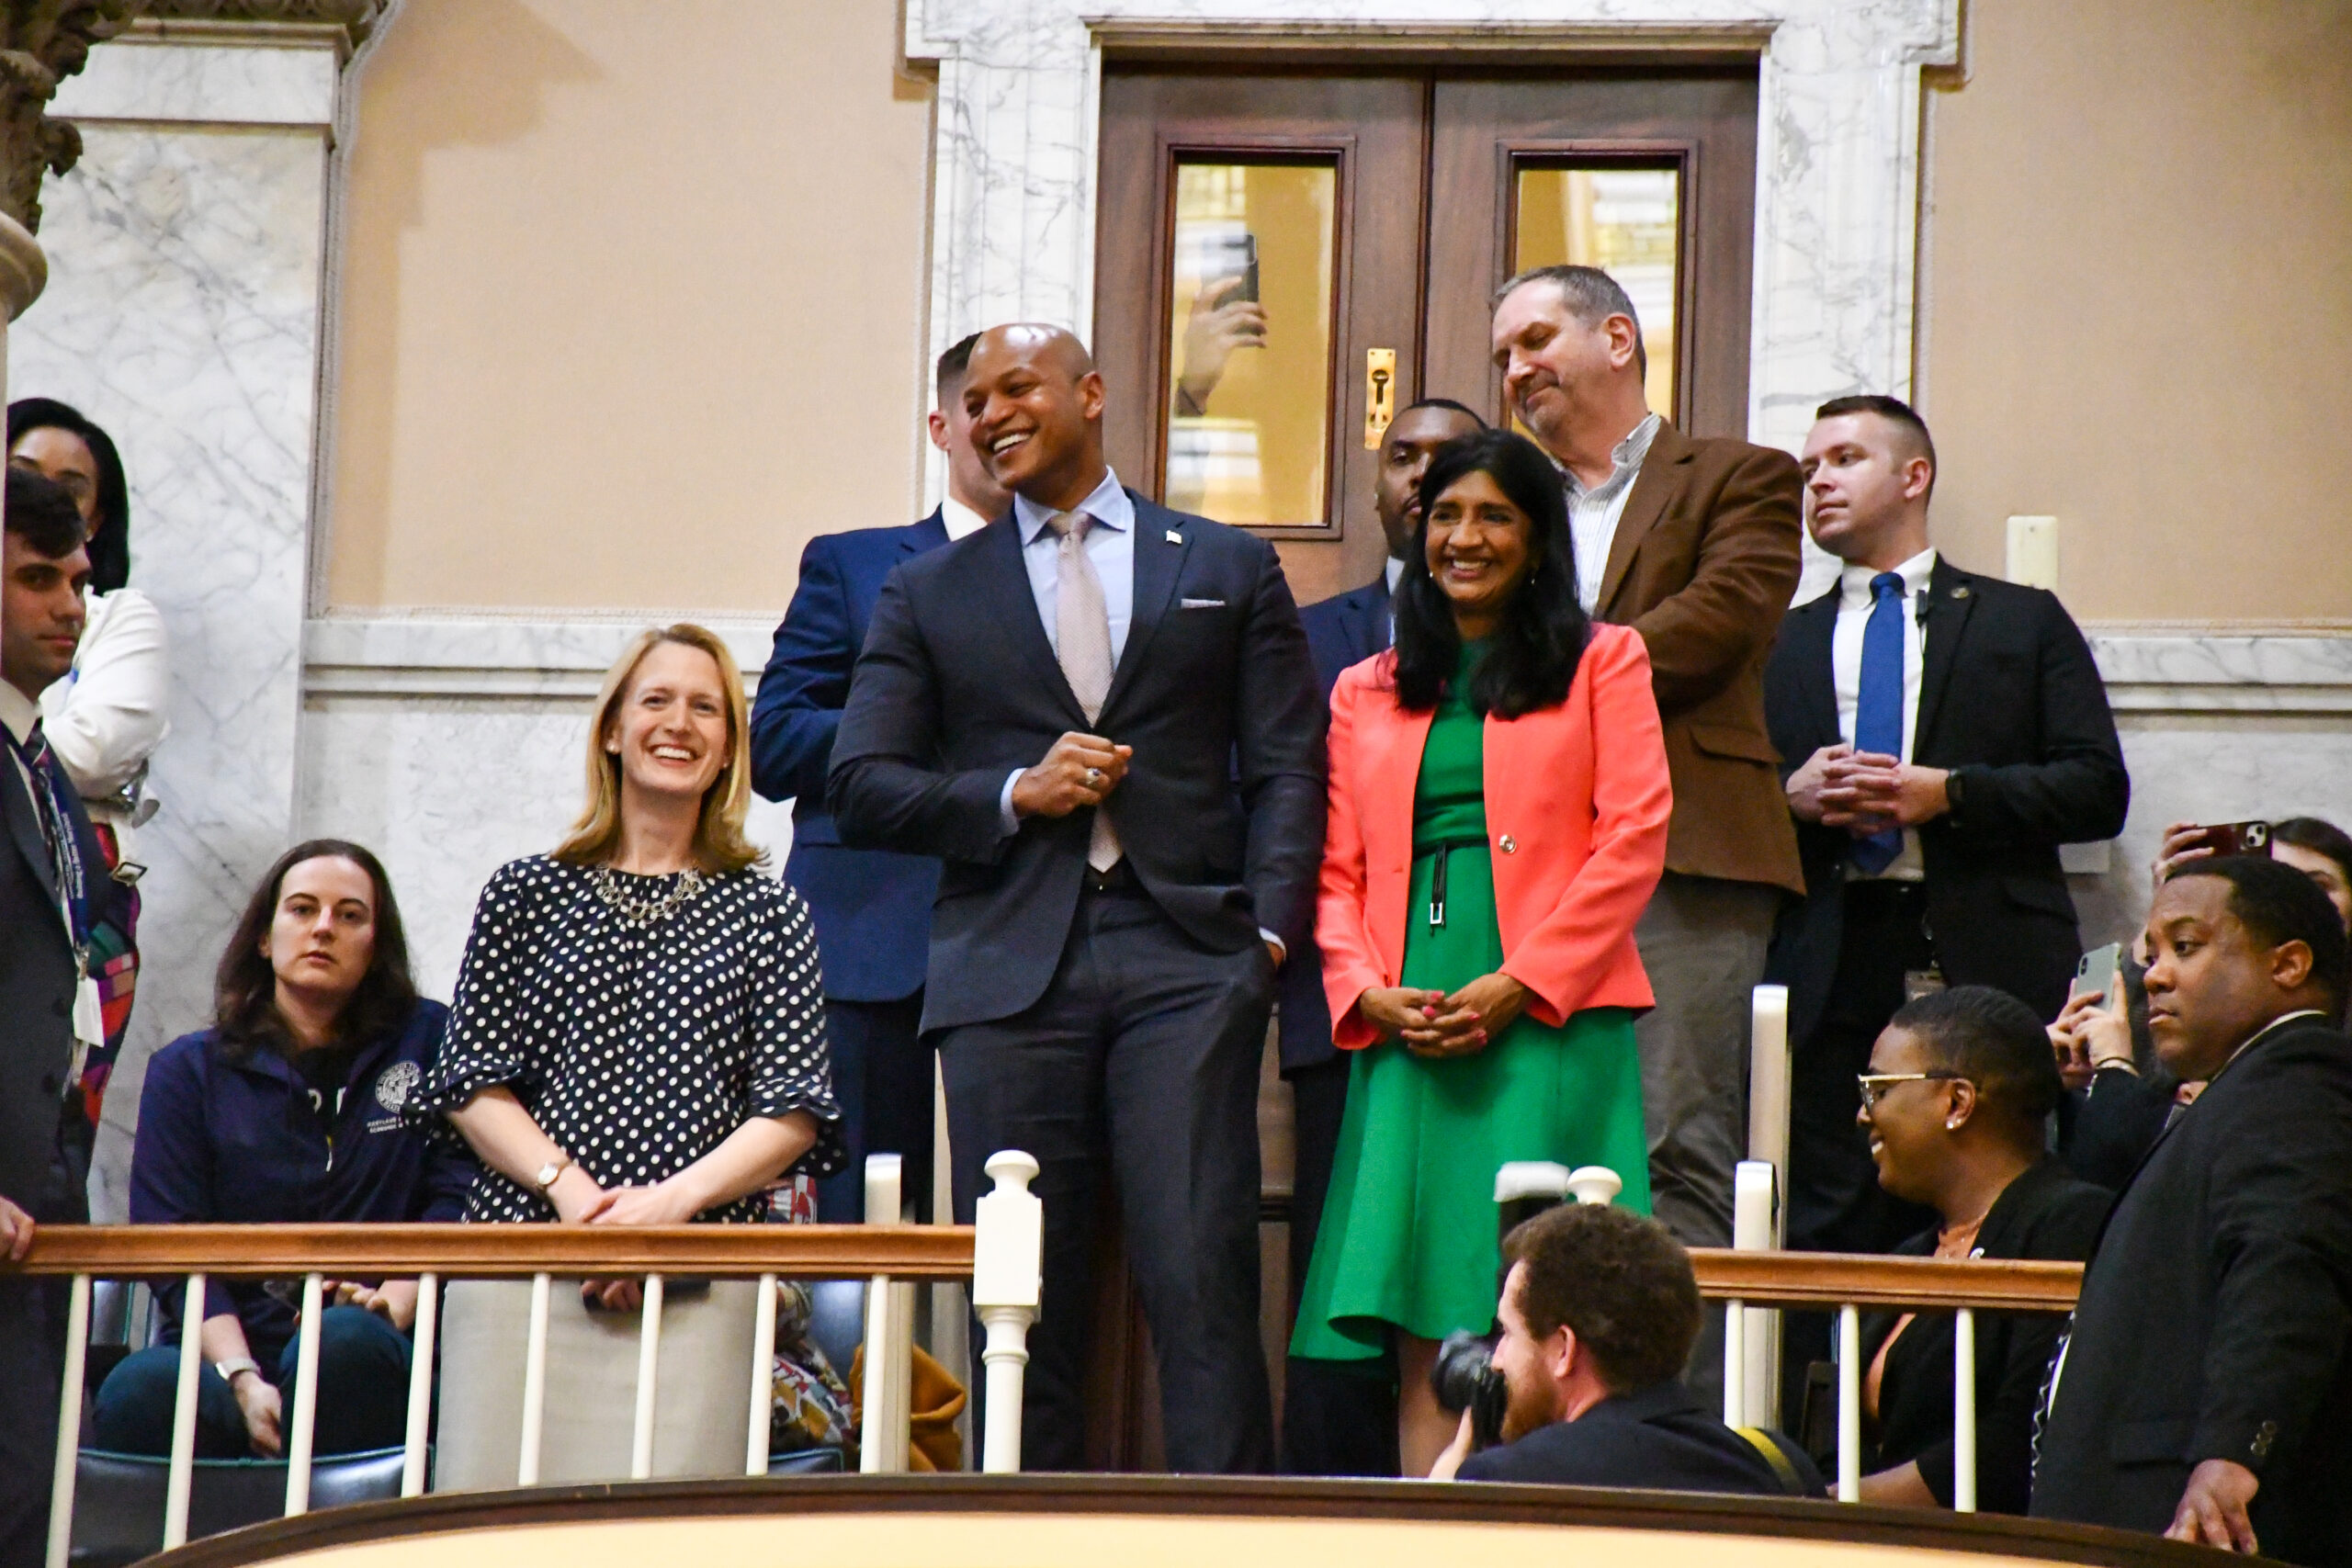 Comptroller Brooke Lierman, Gov. Wes Moore and Lt. Gov. Aruna Miller watch the sine die celebrations from the gallery. (Christine Zhu/Capital News Service)